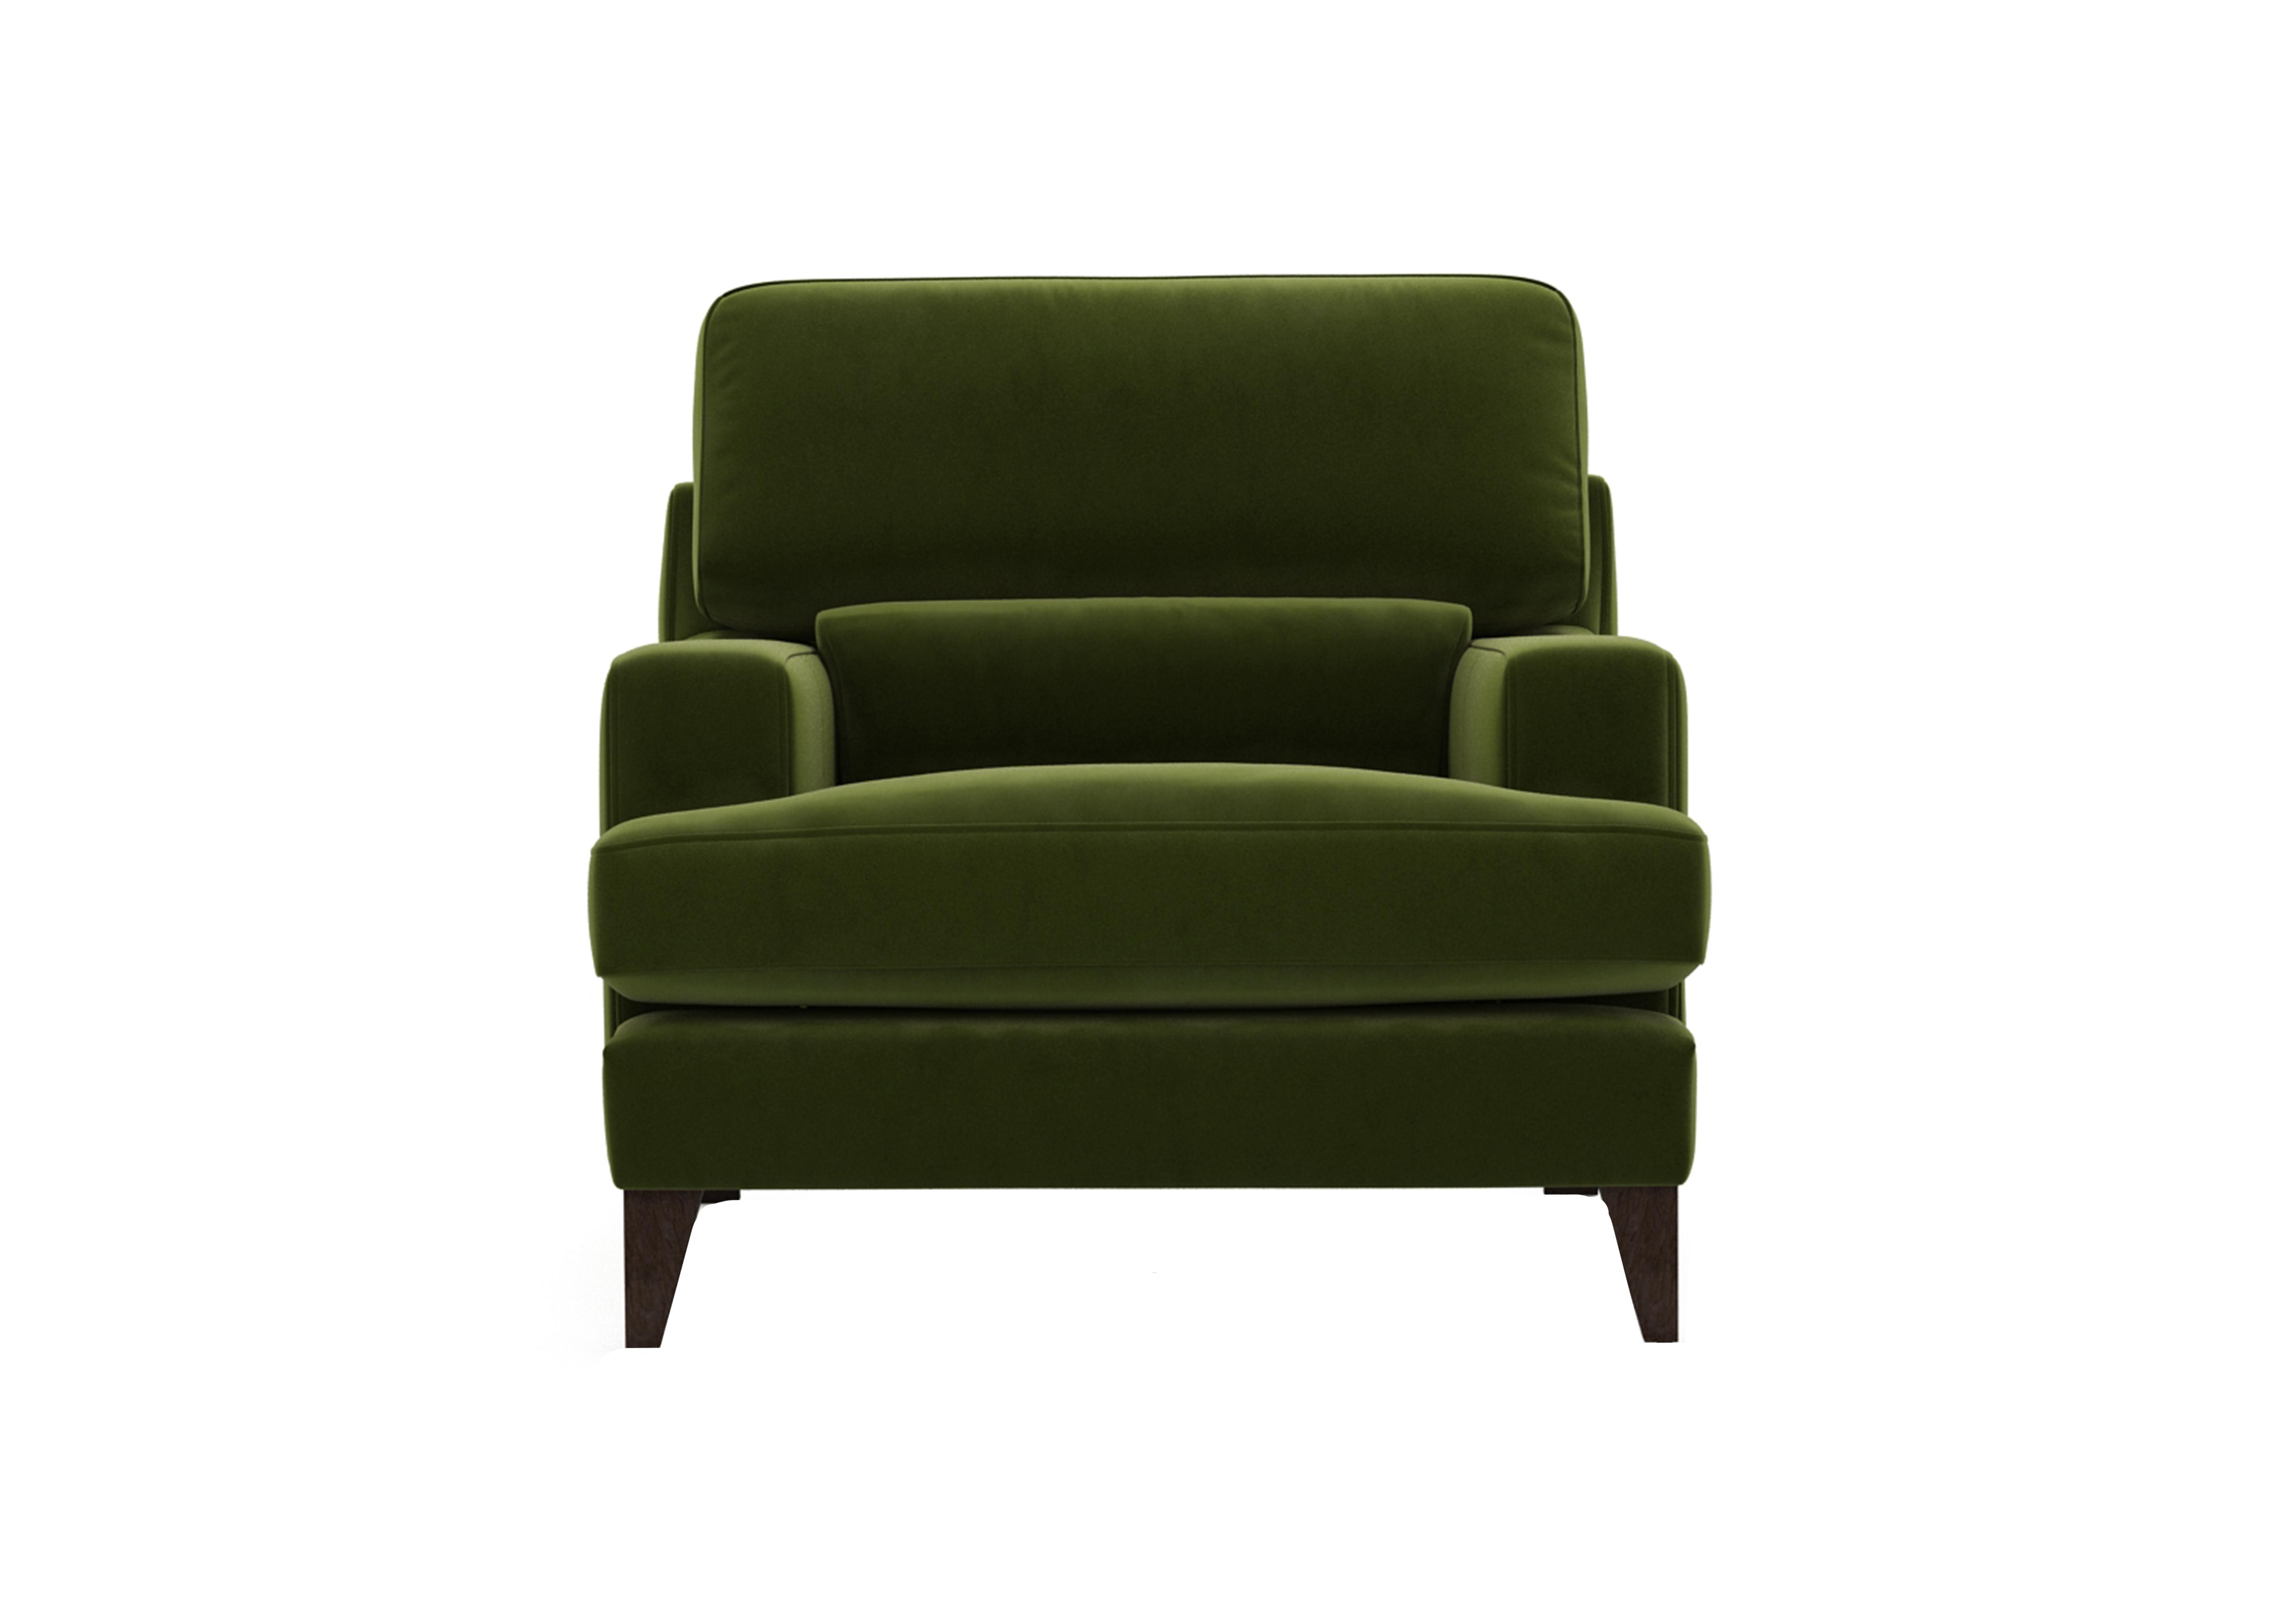 Romilly Fabric Armchair in Woo160 Woodland Moss Wa Ft on Furniture Village